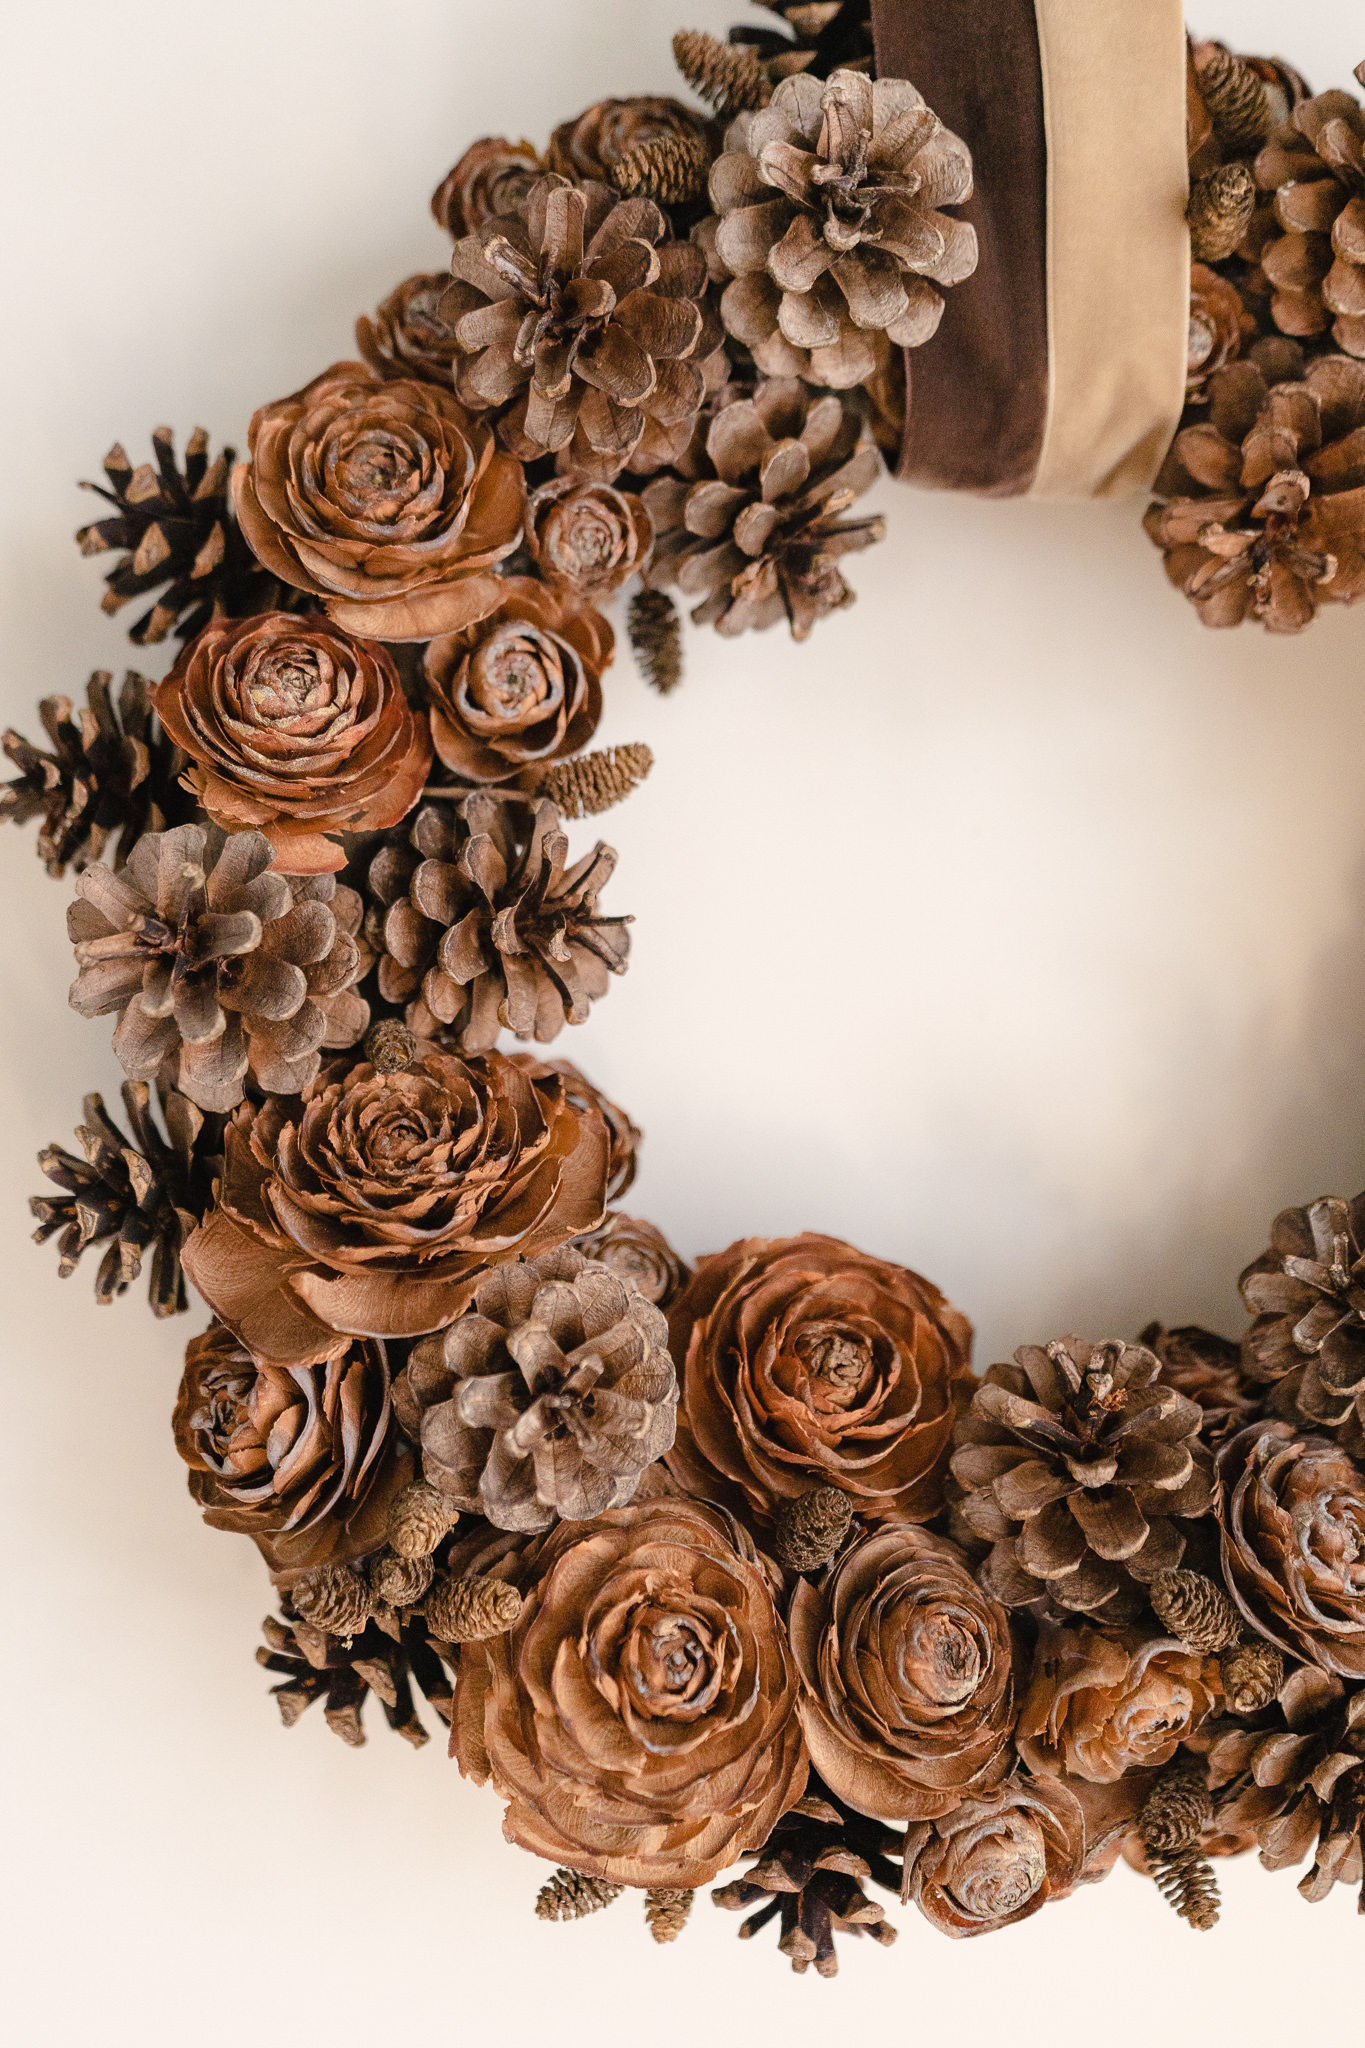 Pinecone Wreath - Finding Lovely